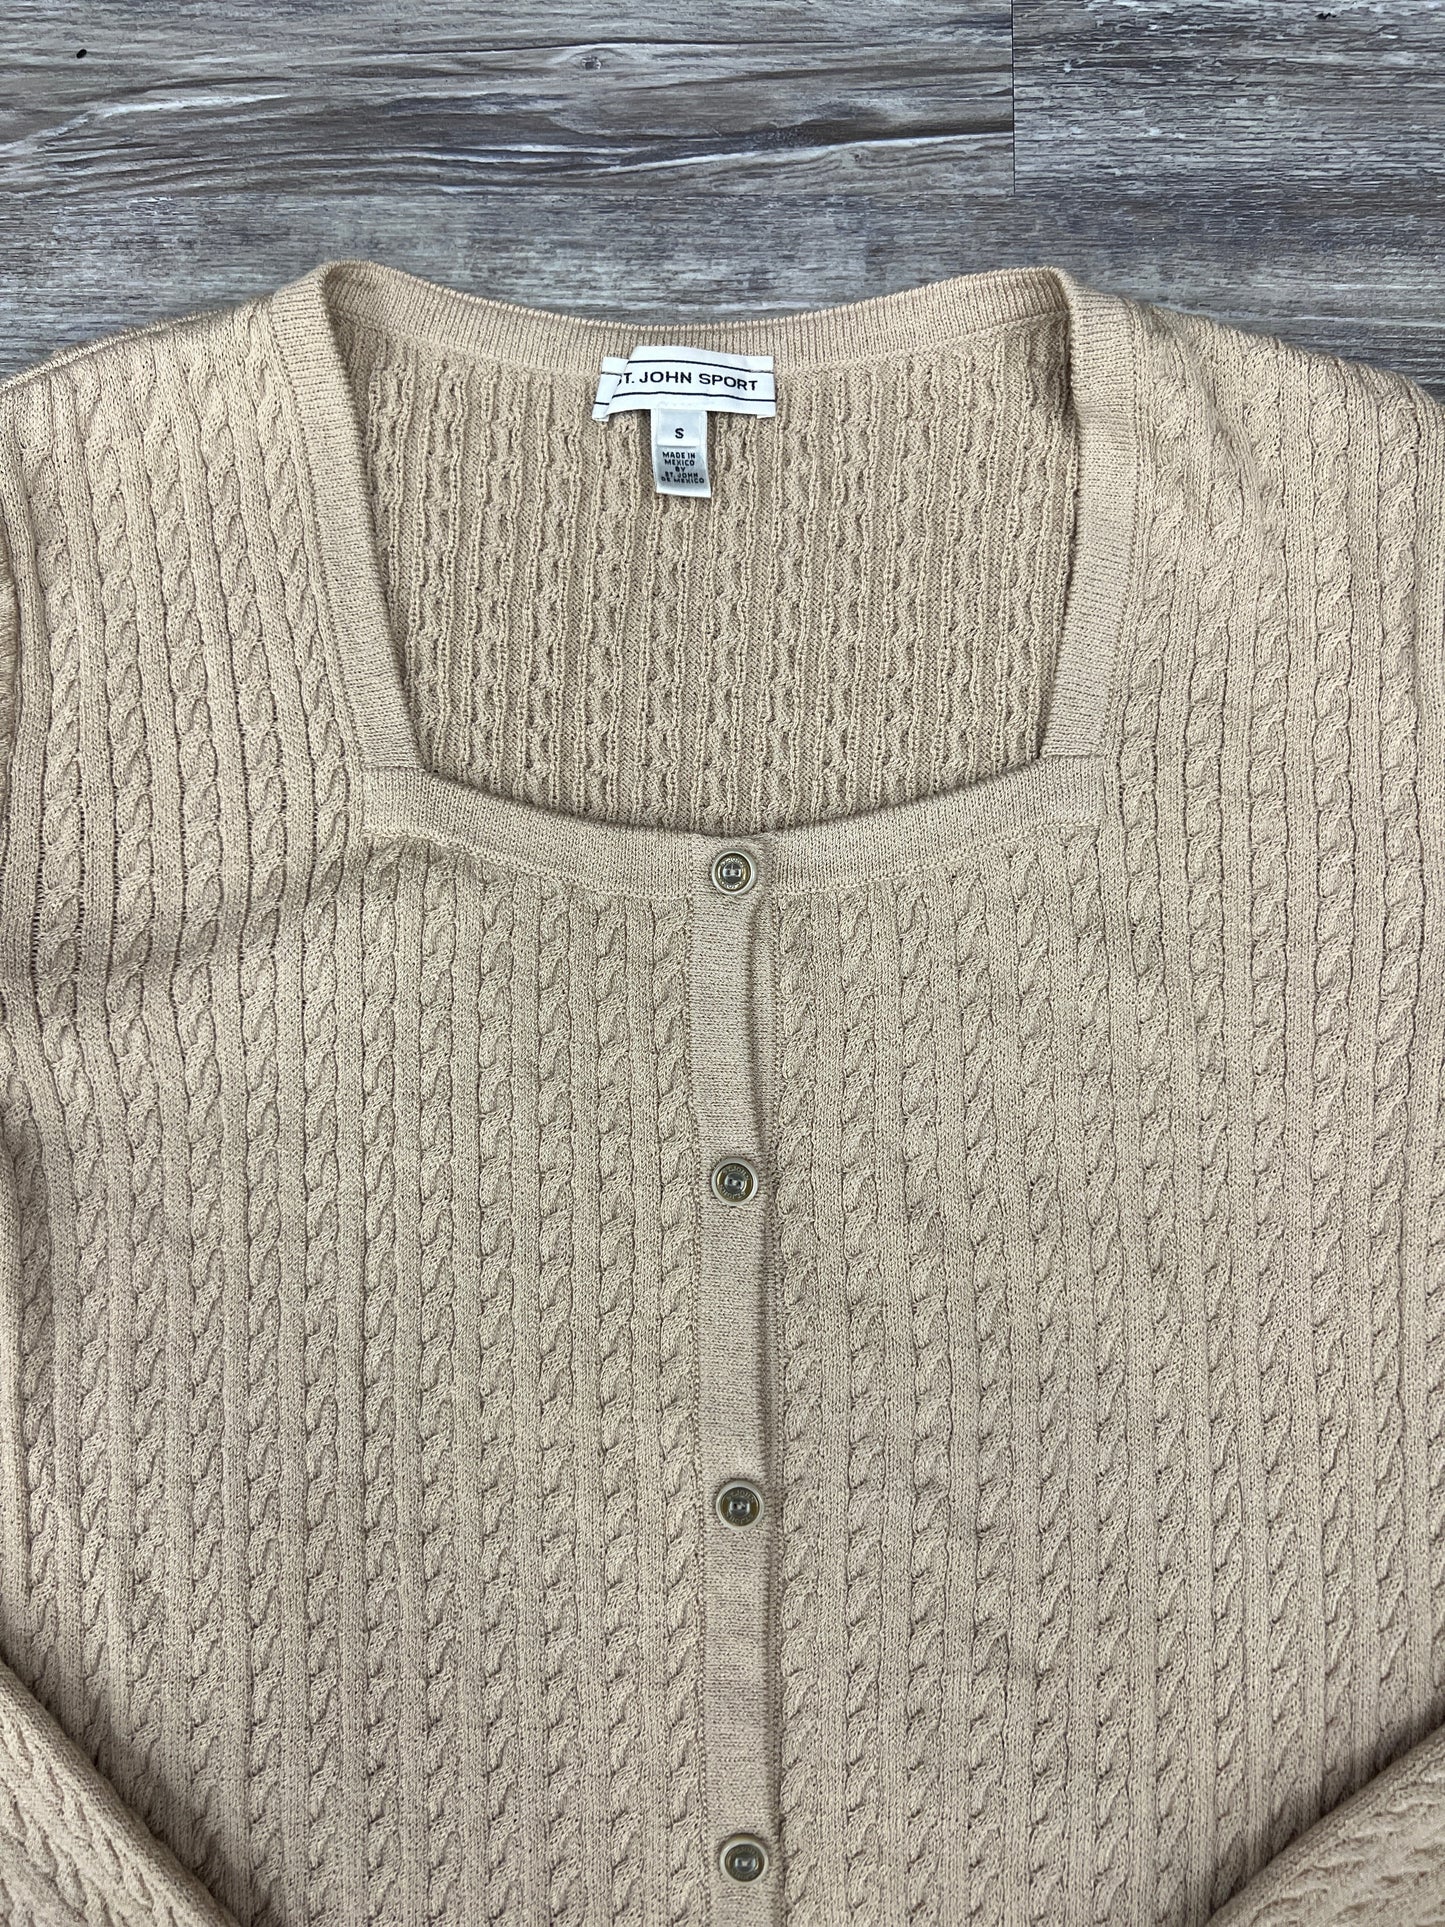 Cardigan Designer By St John Collection  Size: S